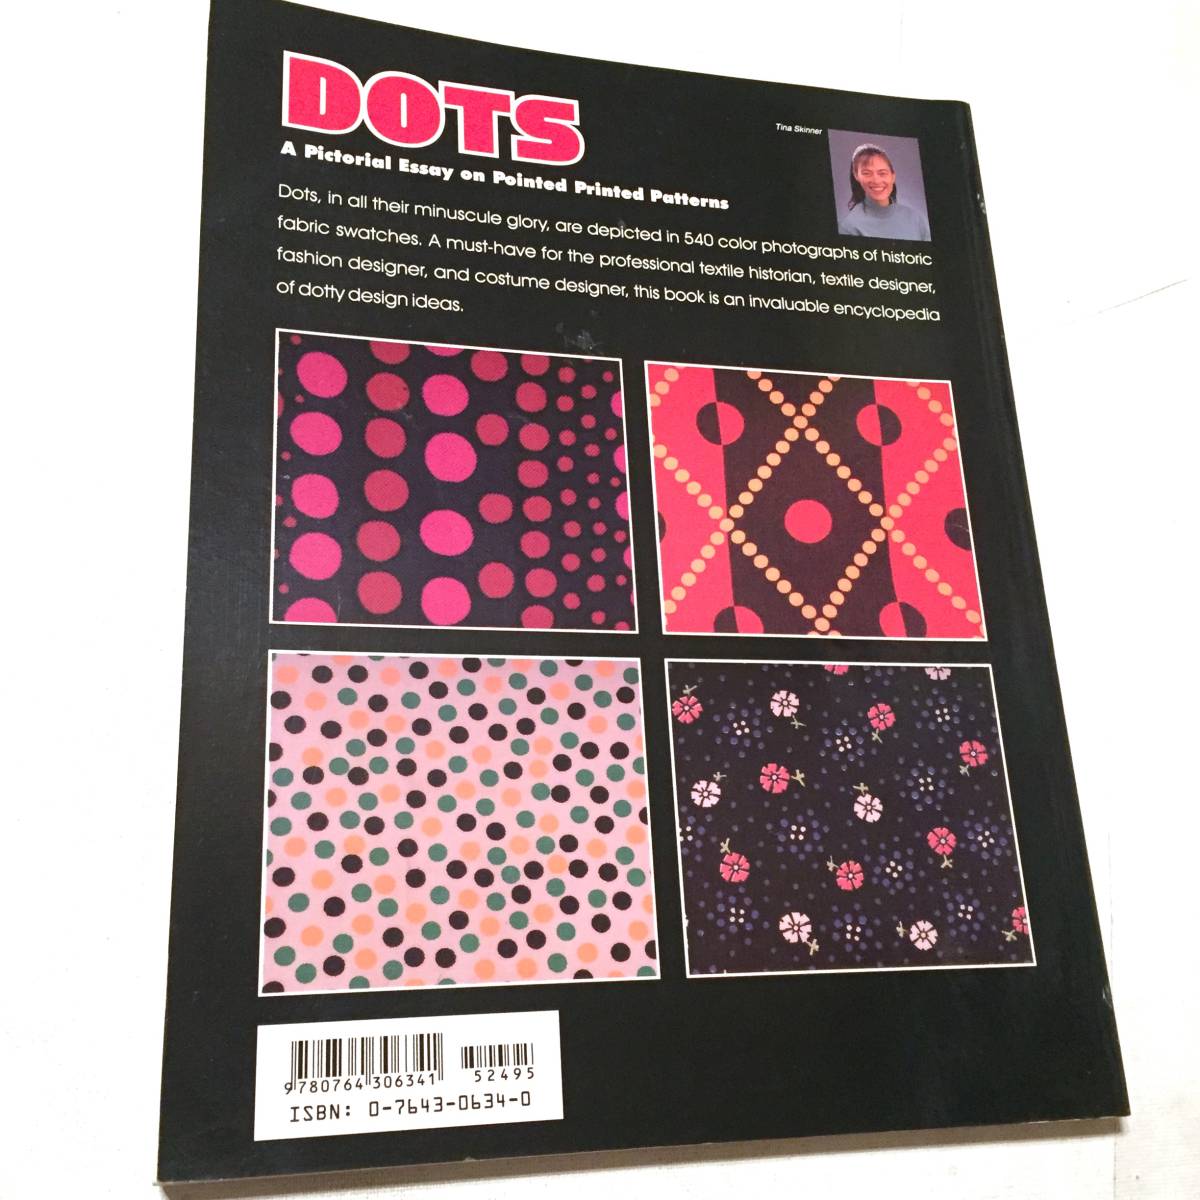 Dots tina skimmer / A Pictorial Essay on Pointed, Printed Patterns (Schiffer Book for Collectors and Designers)_画像2